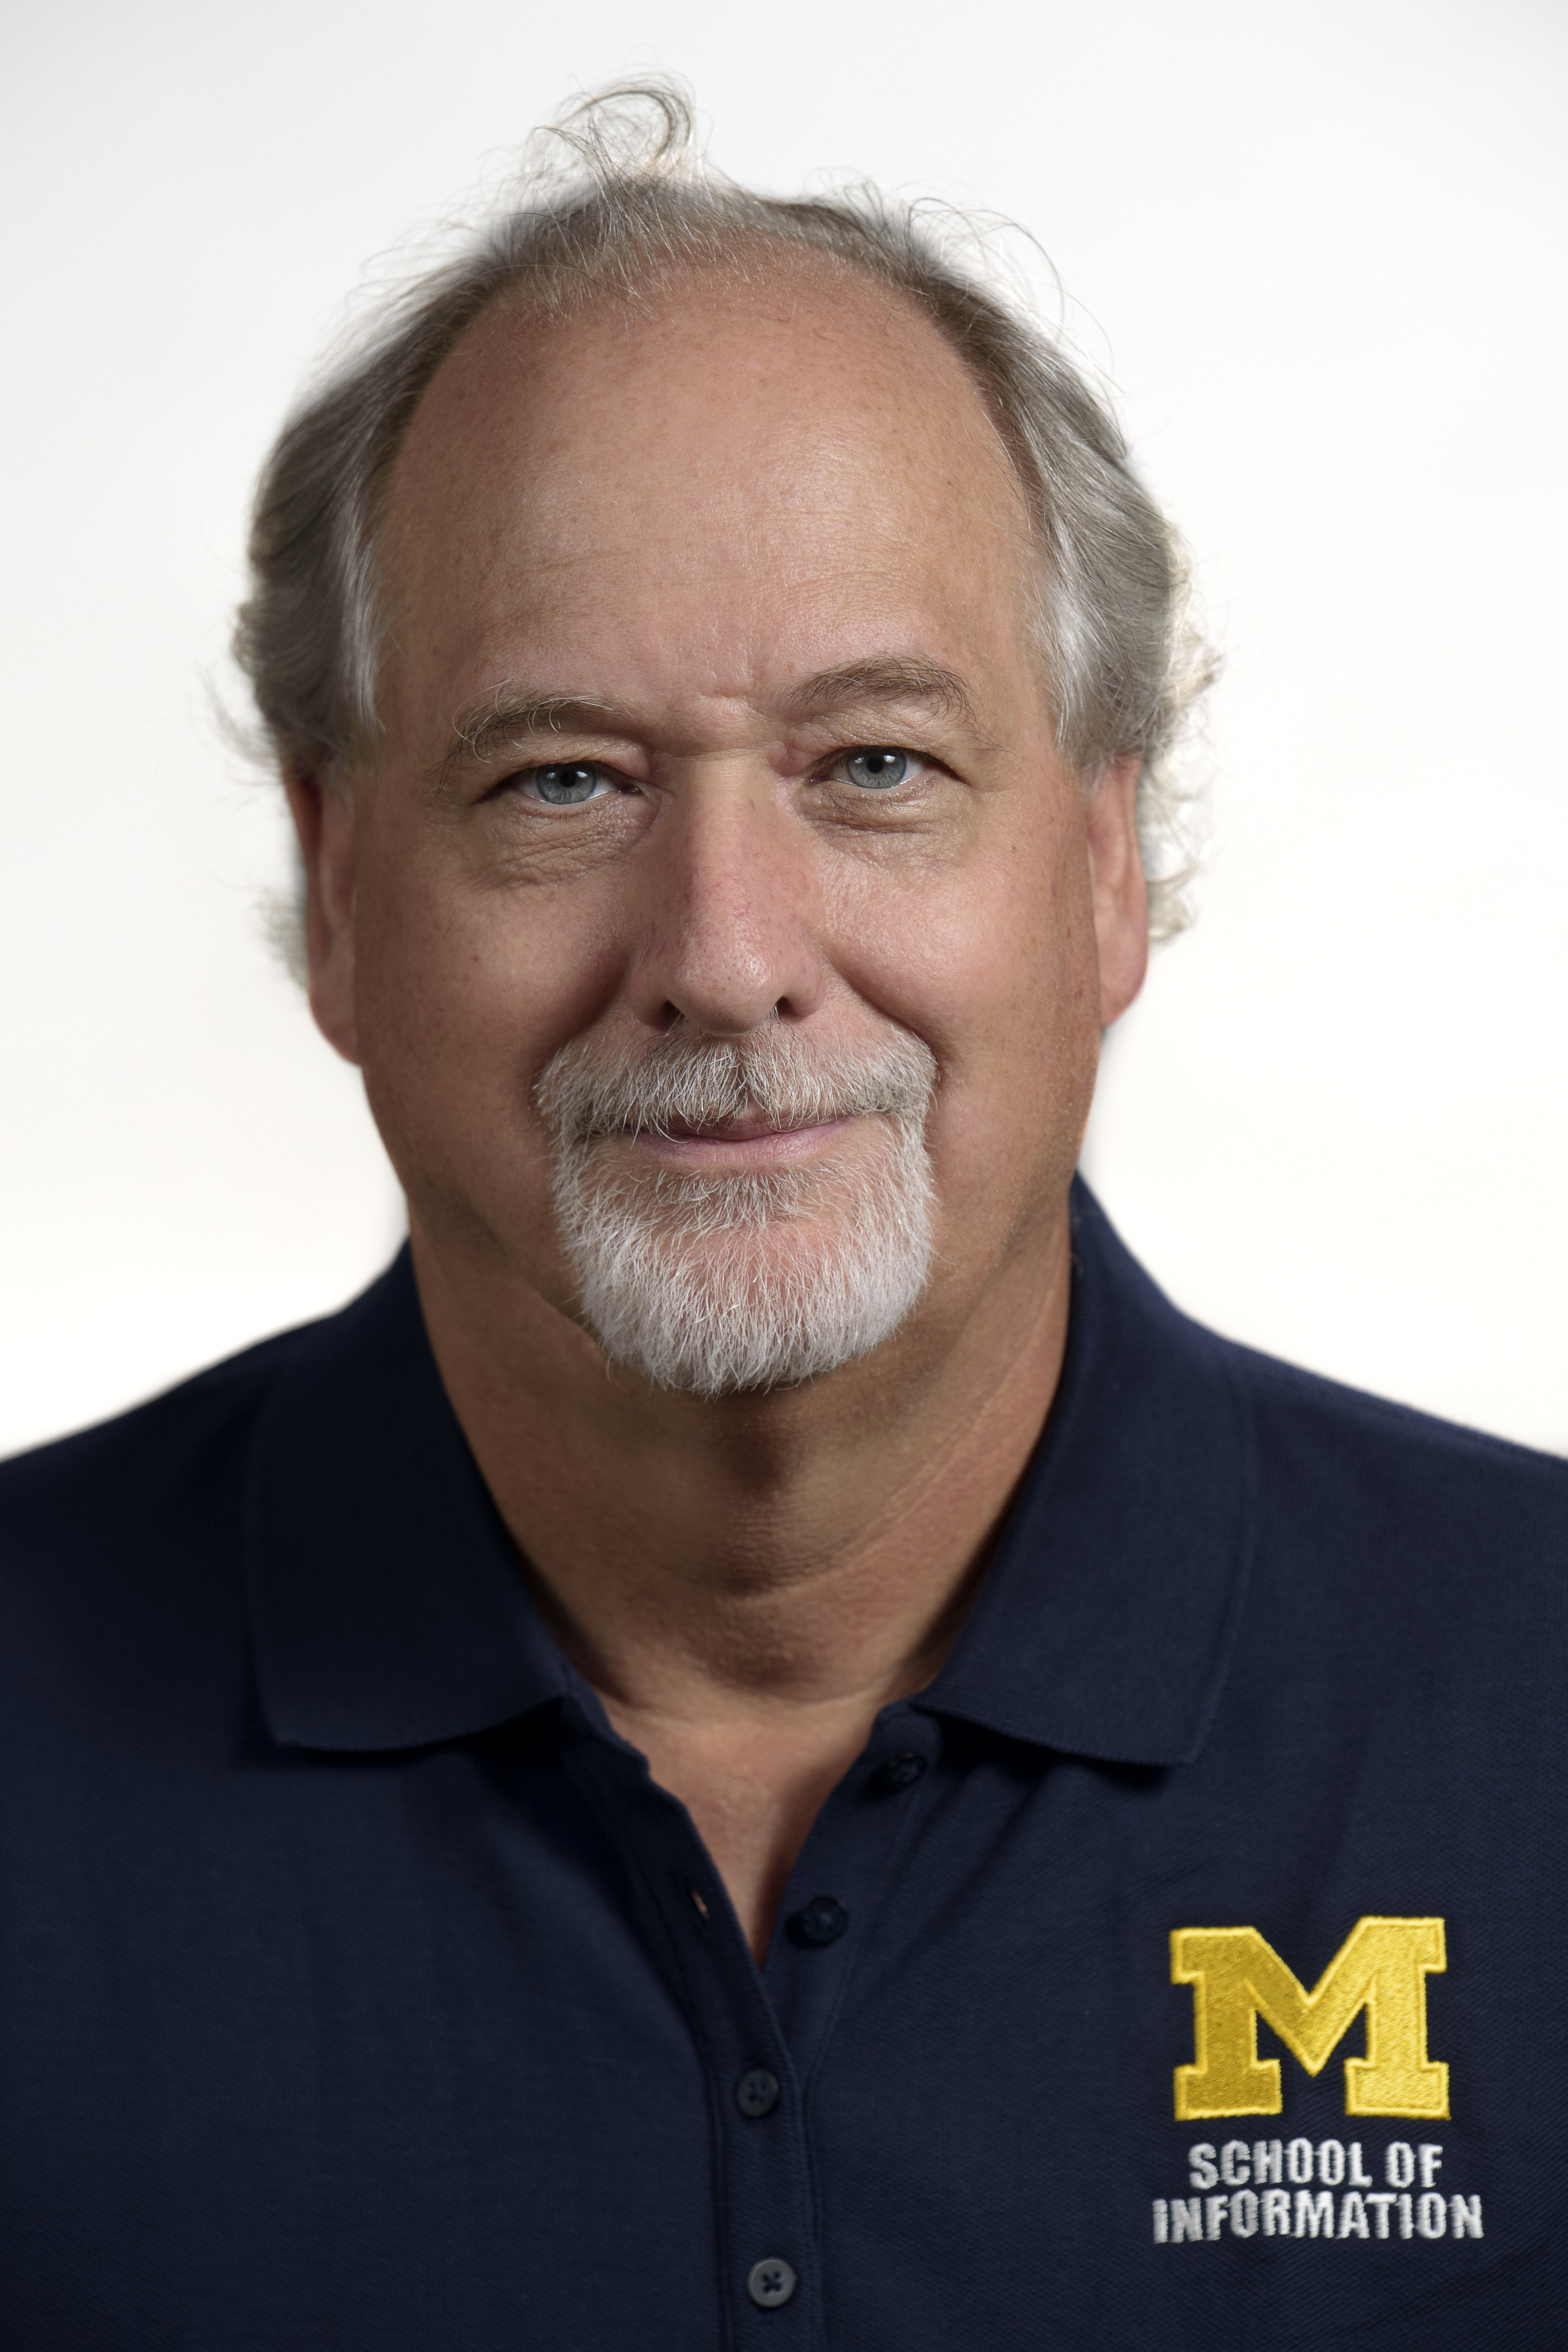 Dr. Chuck Picture with UMSI shirt